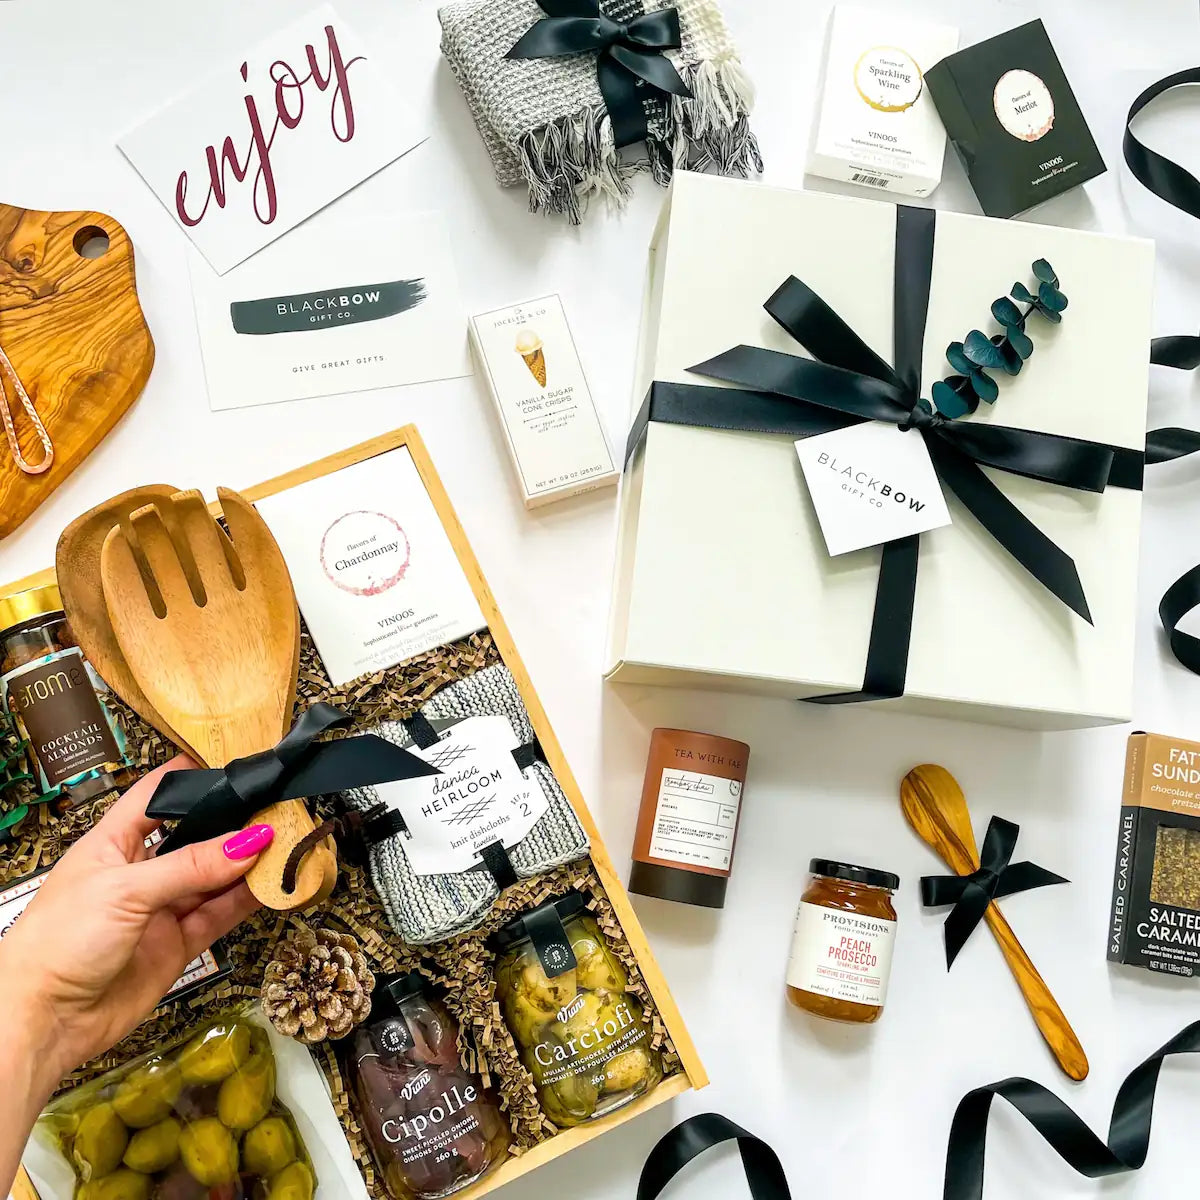 Choose the gifts to include in your custom gift box